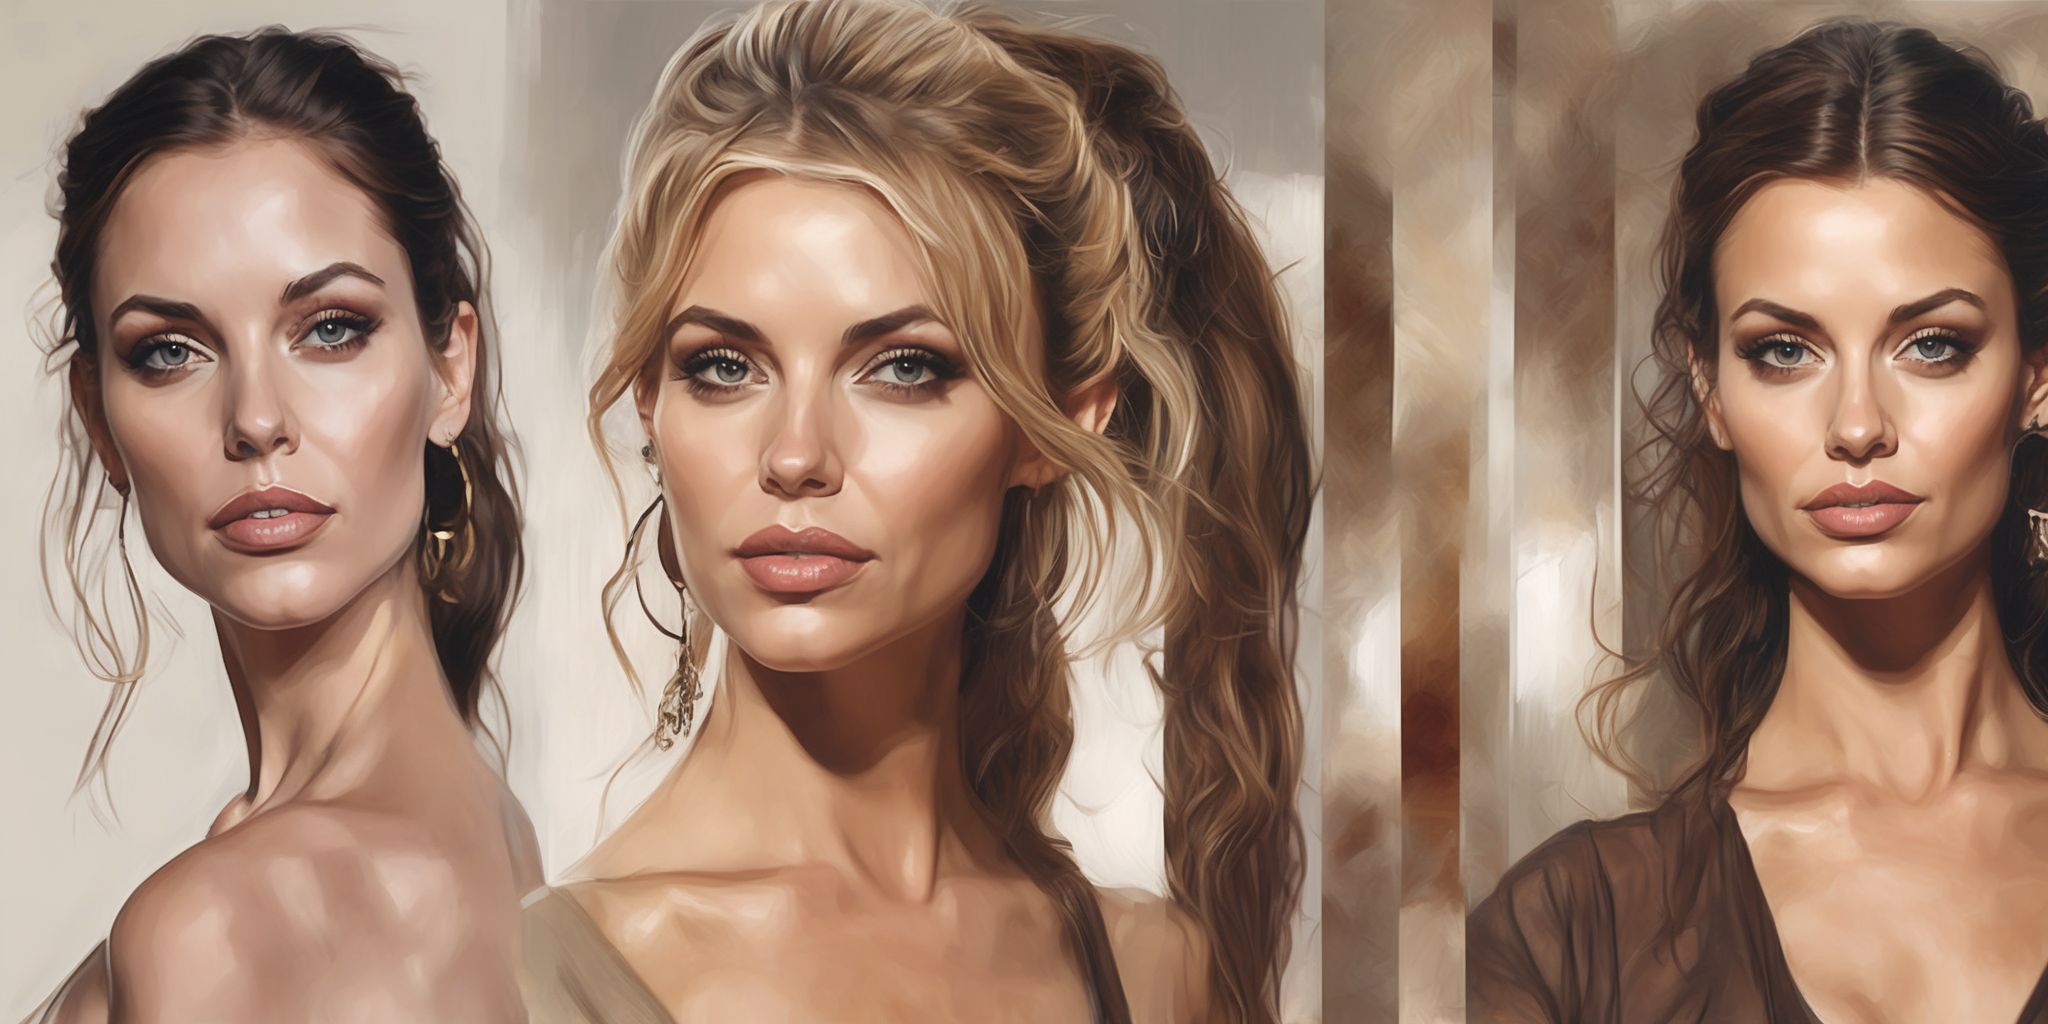 Celebrity  in realistic, photographic style